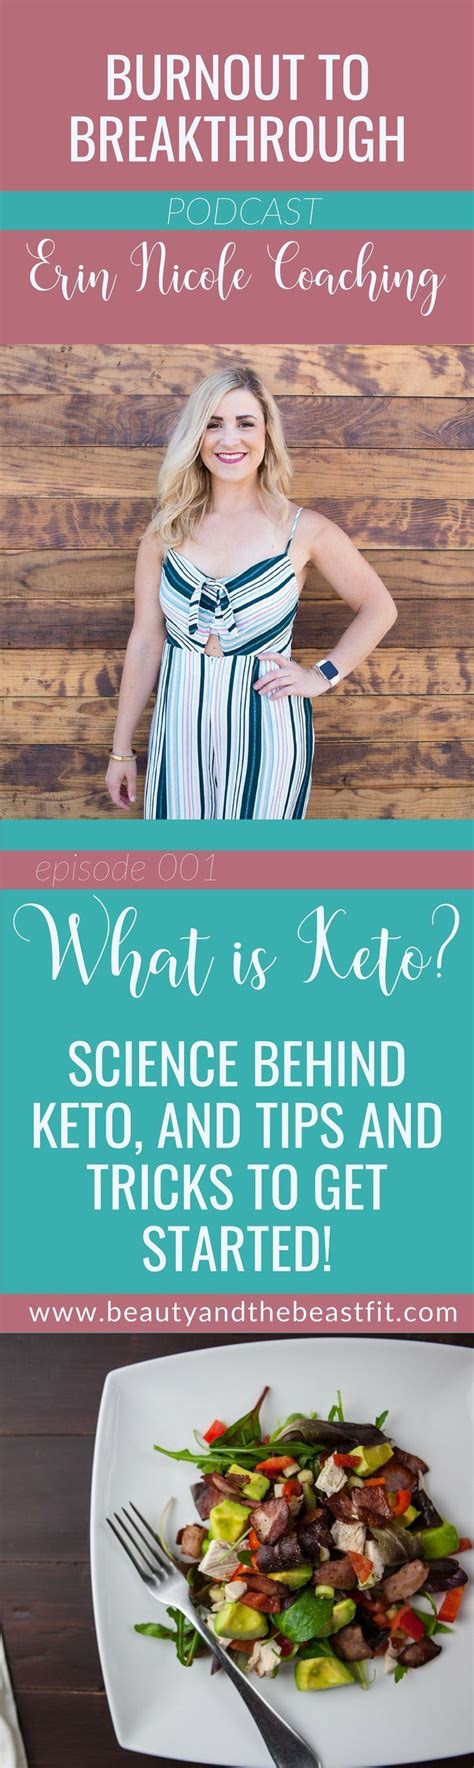 What Is Keto The Science Behind Keto And Tips And Tricks To Get Started Keto Keto Diet